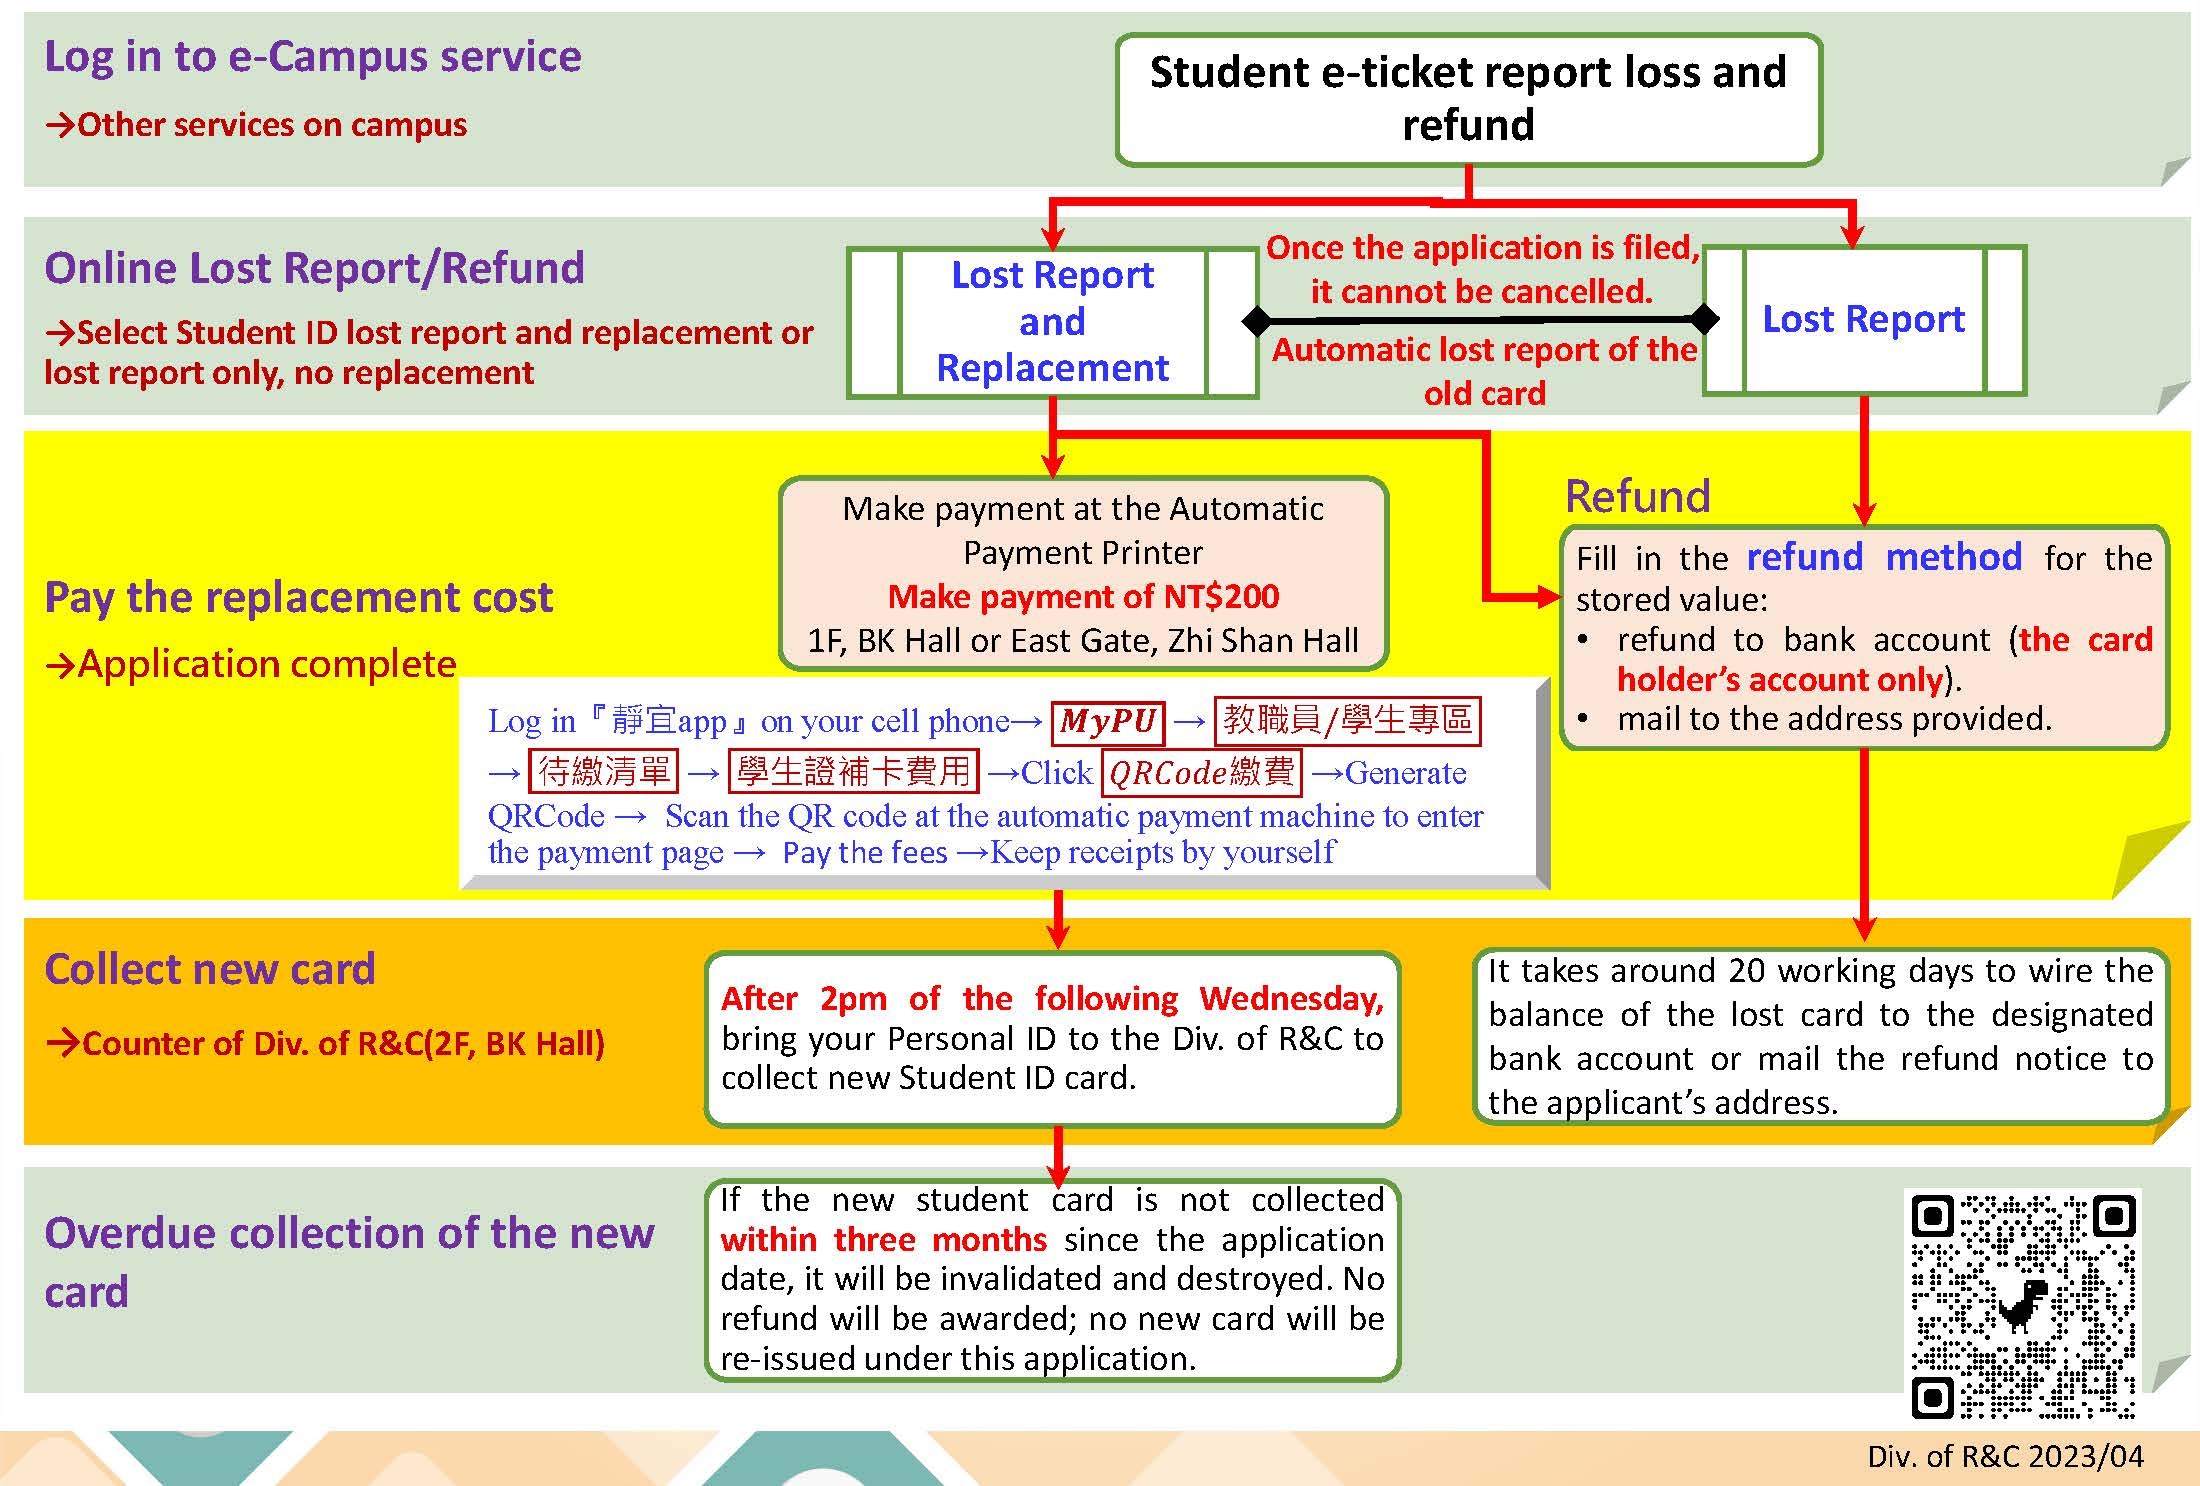 Application Flowchart for Student ID Card Lost Report, Replacement, and Refund